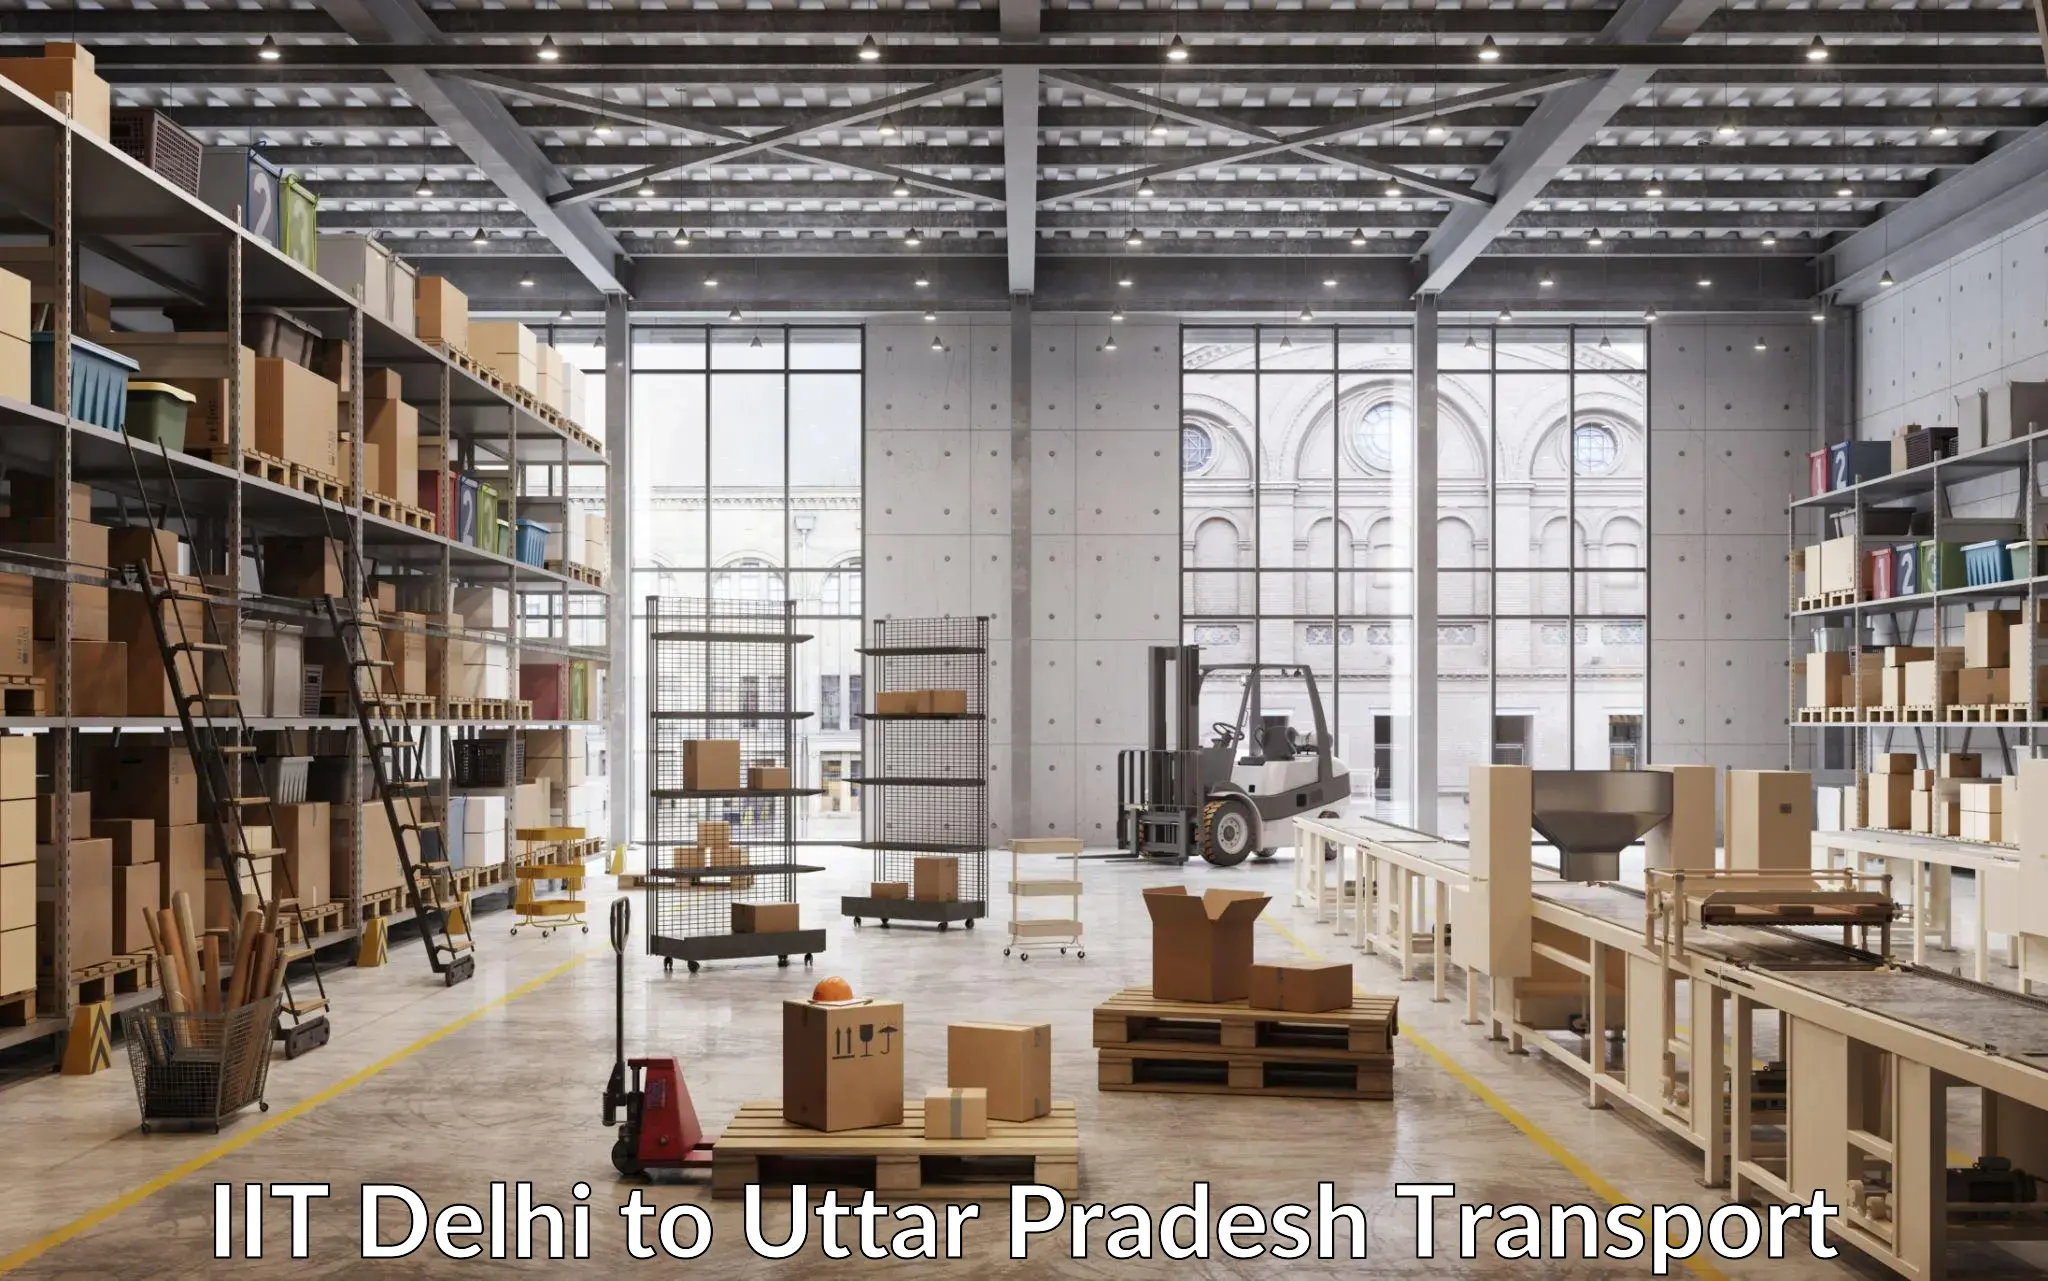 Daily parcel service transport IIT Delhi to Chhata